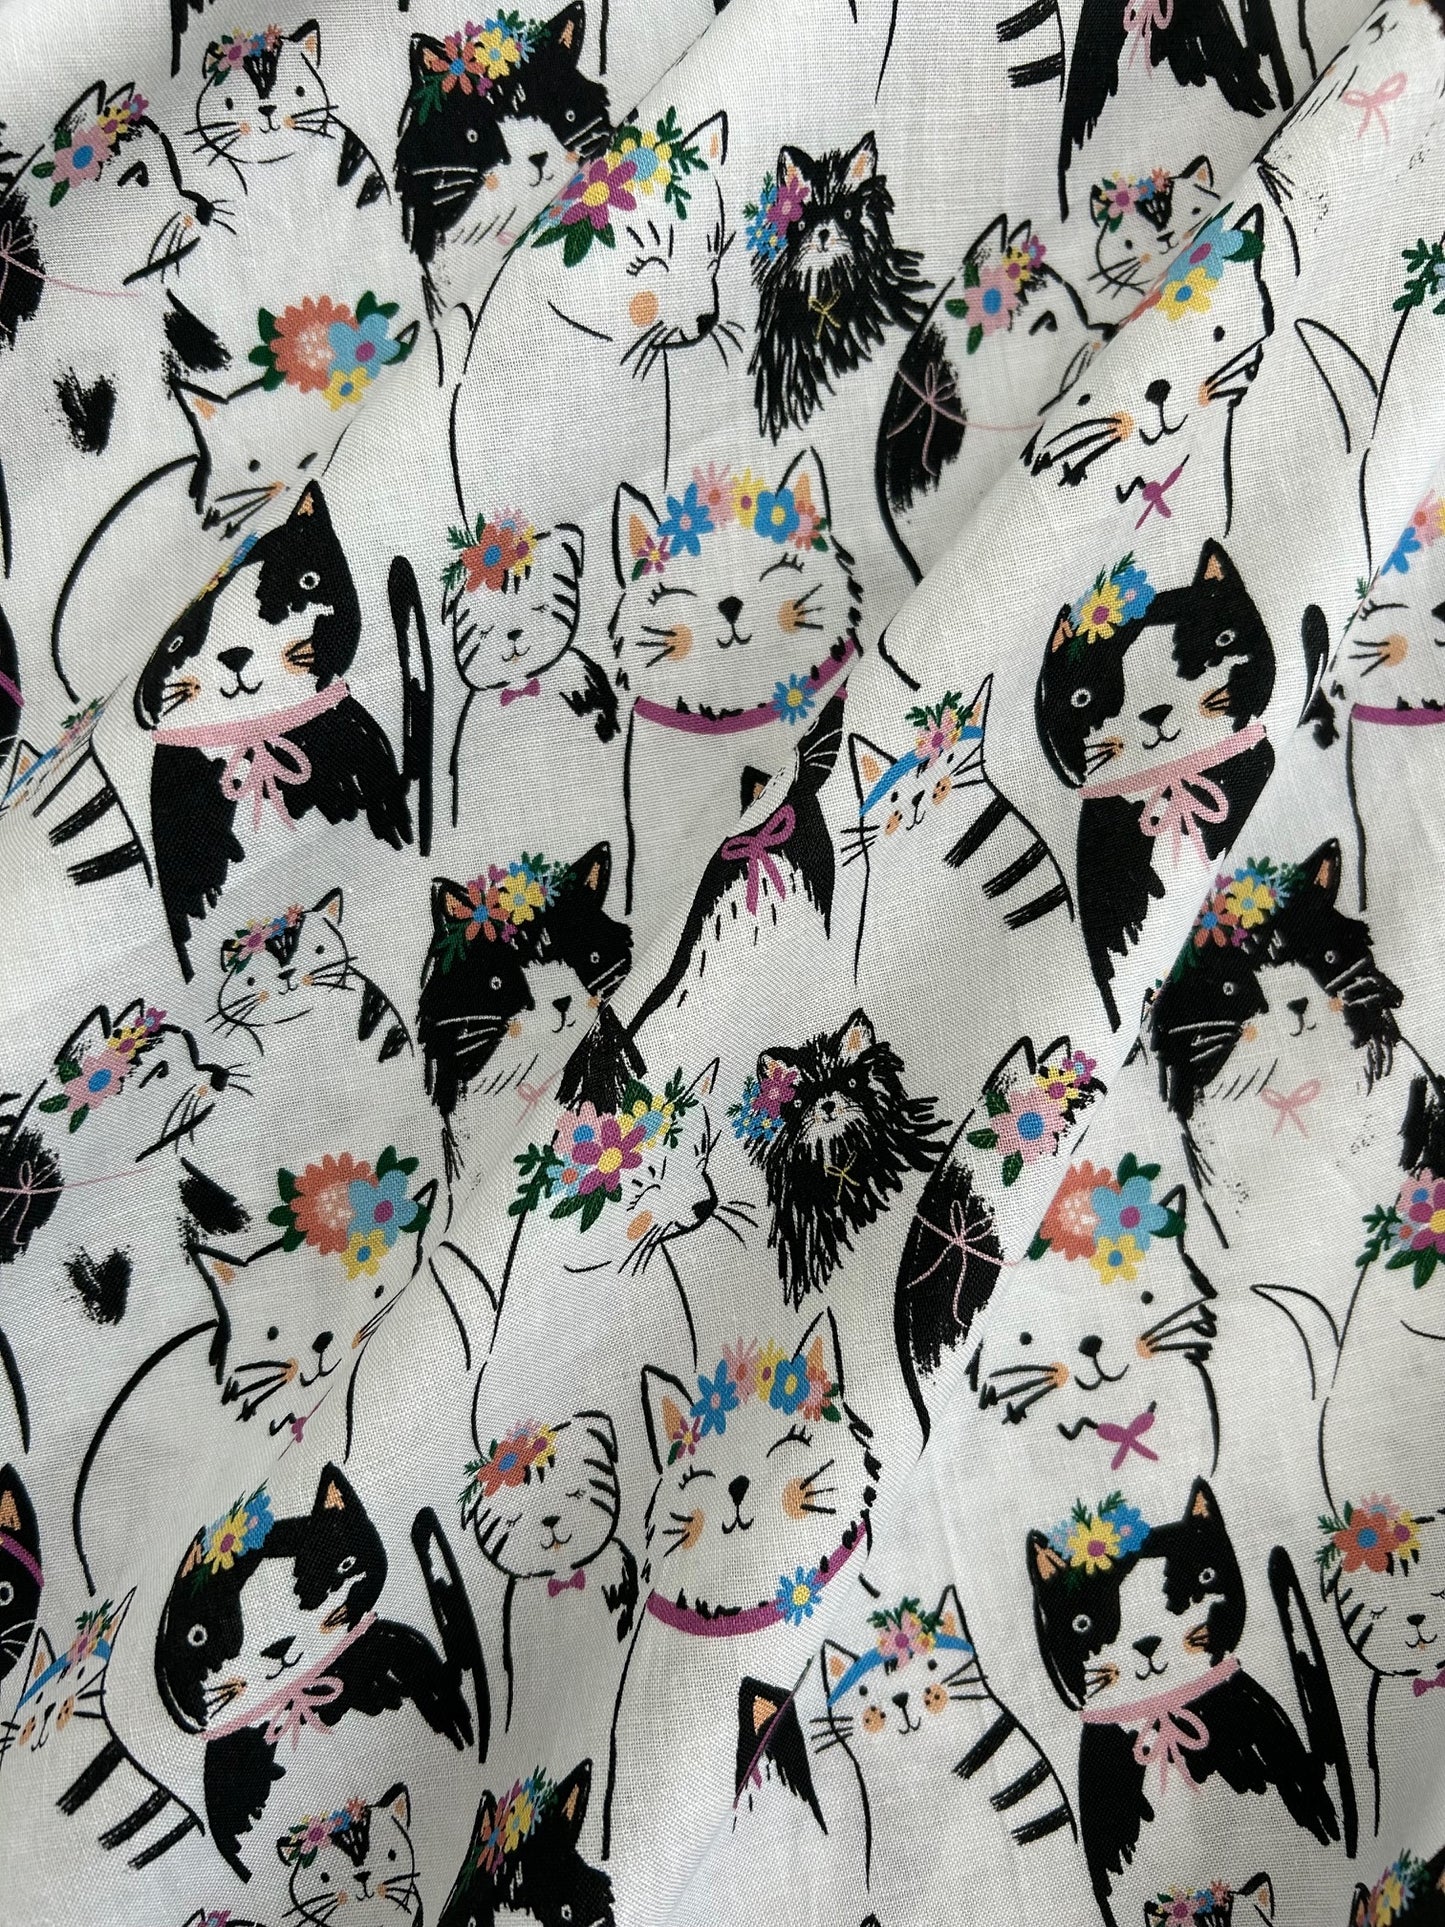 close up of the fabric showing the cats in their floral headbands